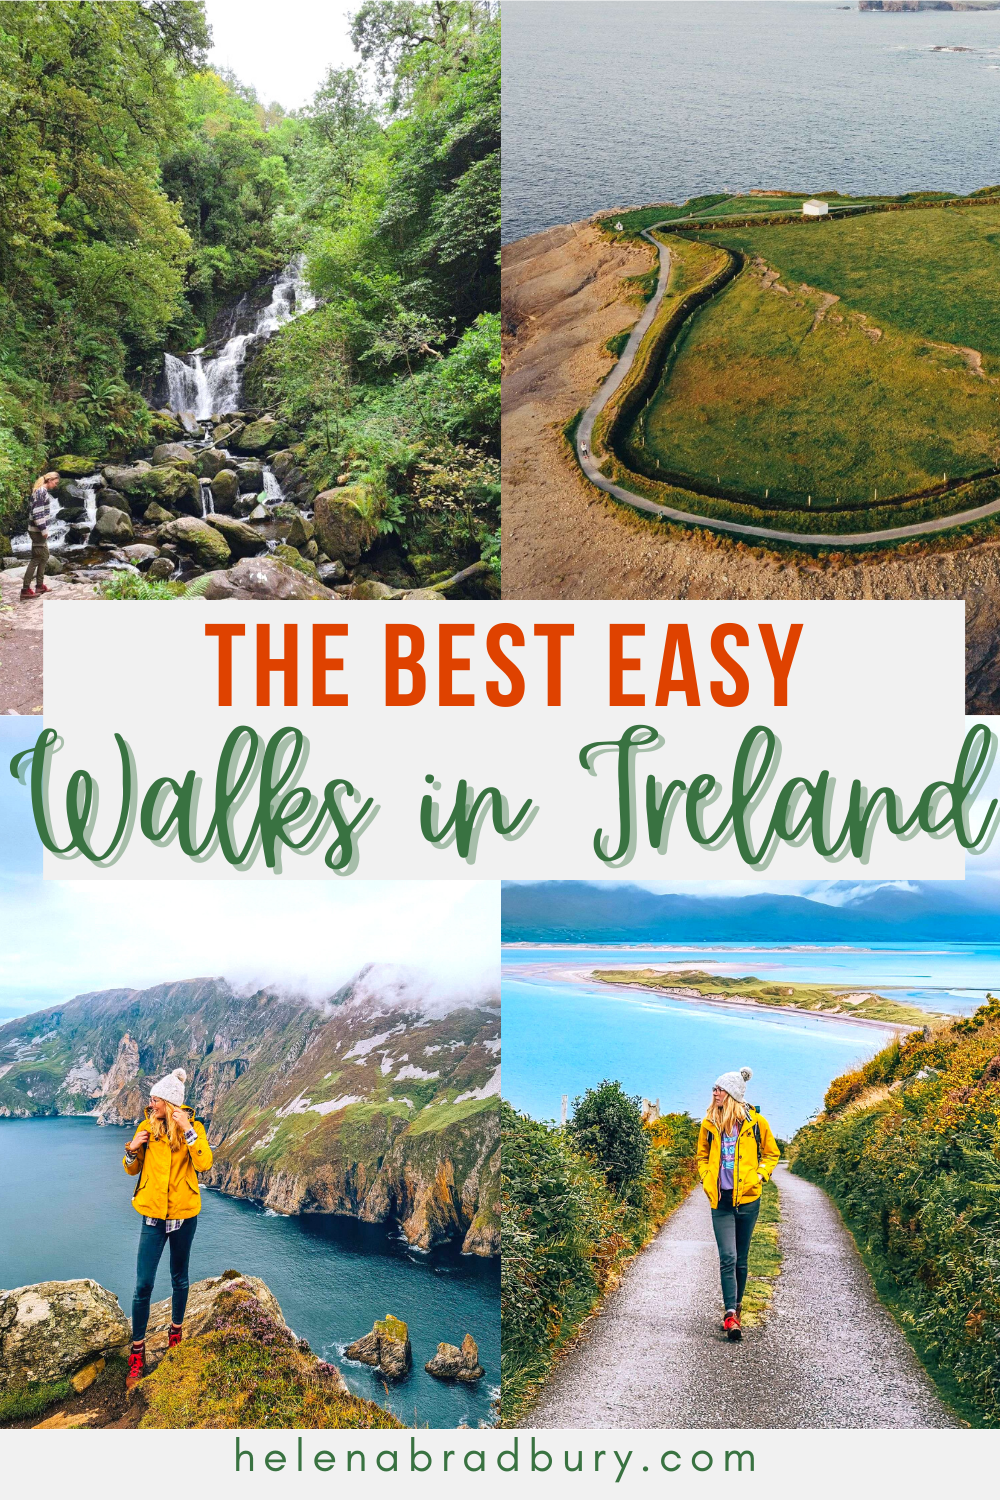 Whether you’re looking for the best walking trails in Ireland or some easy walks in Ireland, these easy walks with epic views should be on your Ireland list. With trail details for each included | wild atlantic way ireland hiking | best hiking in ire